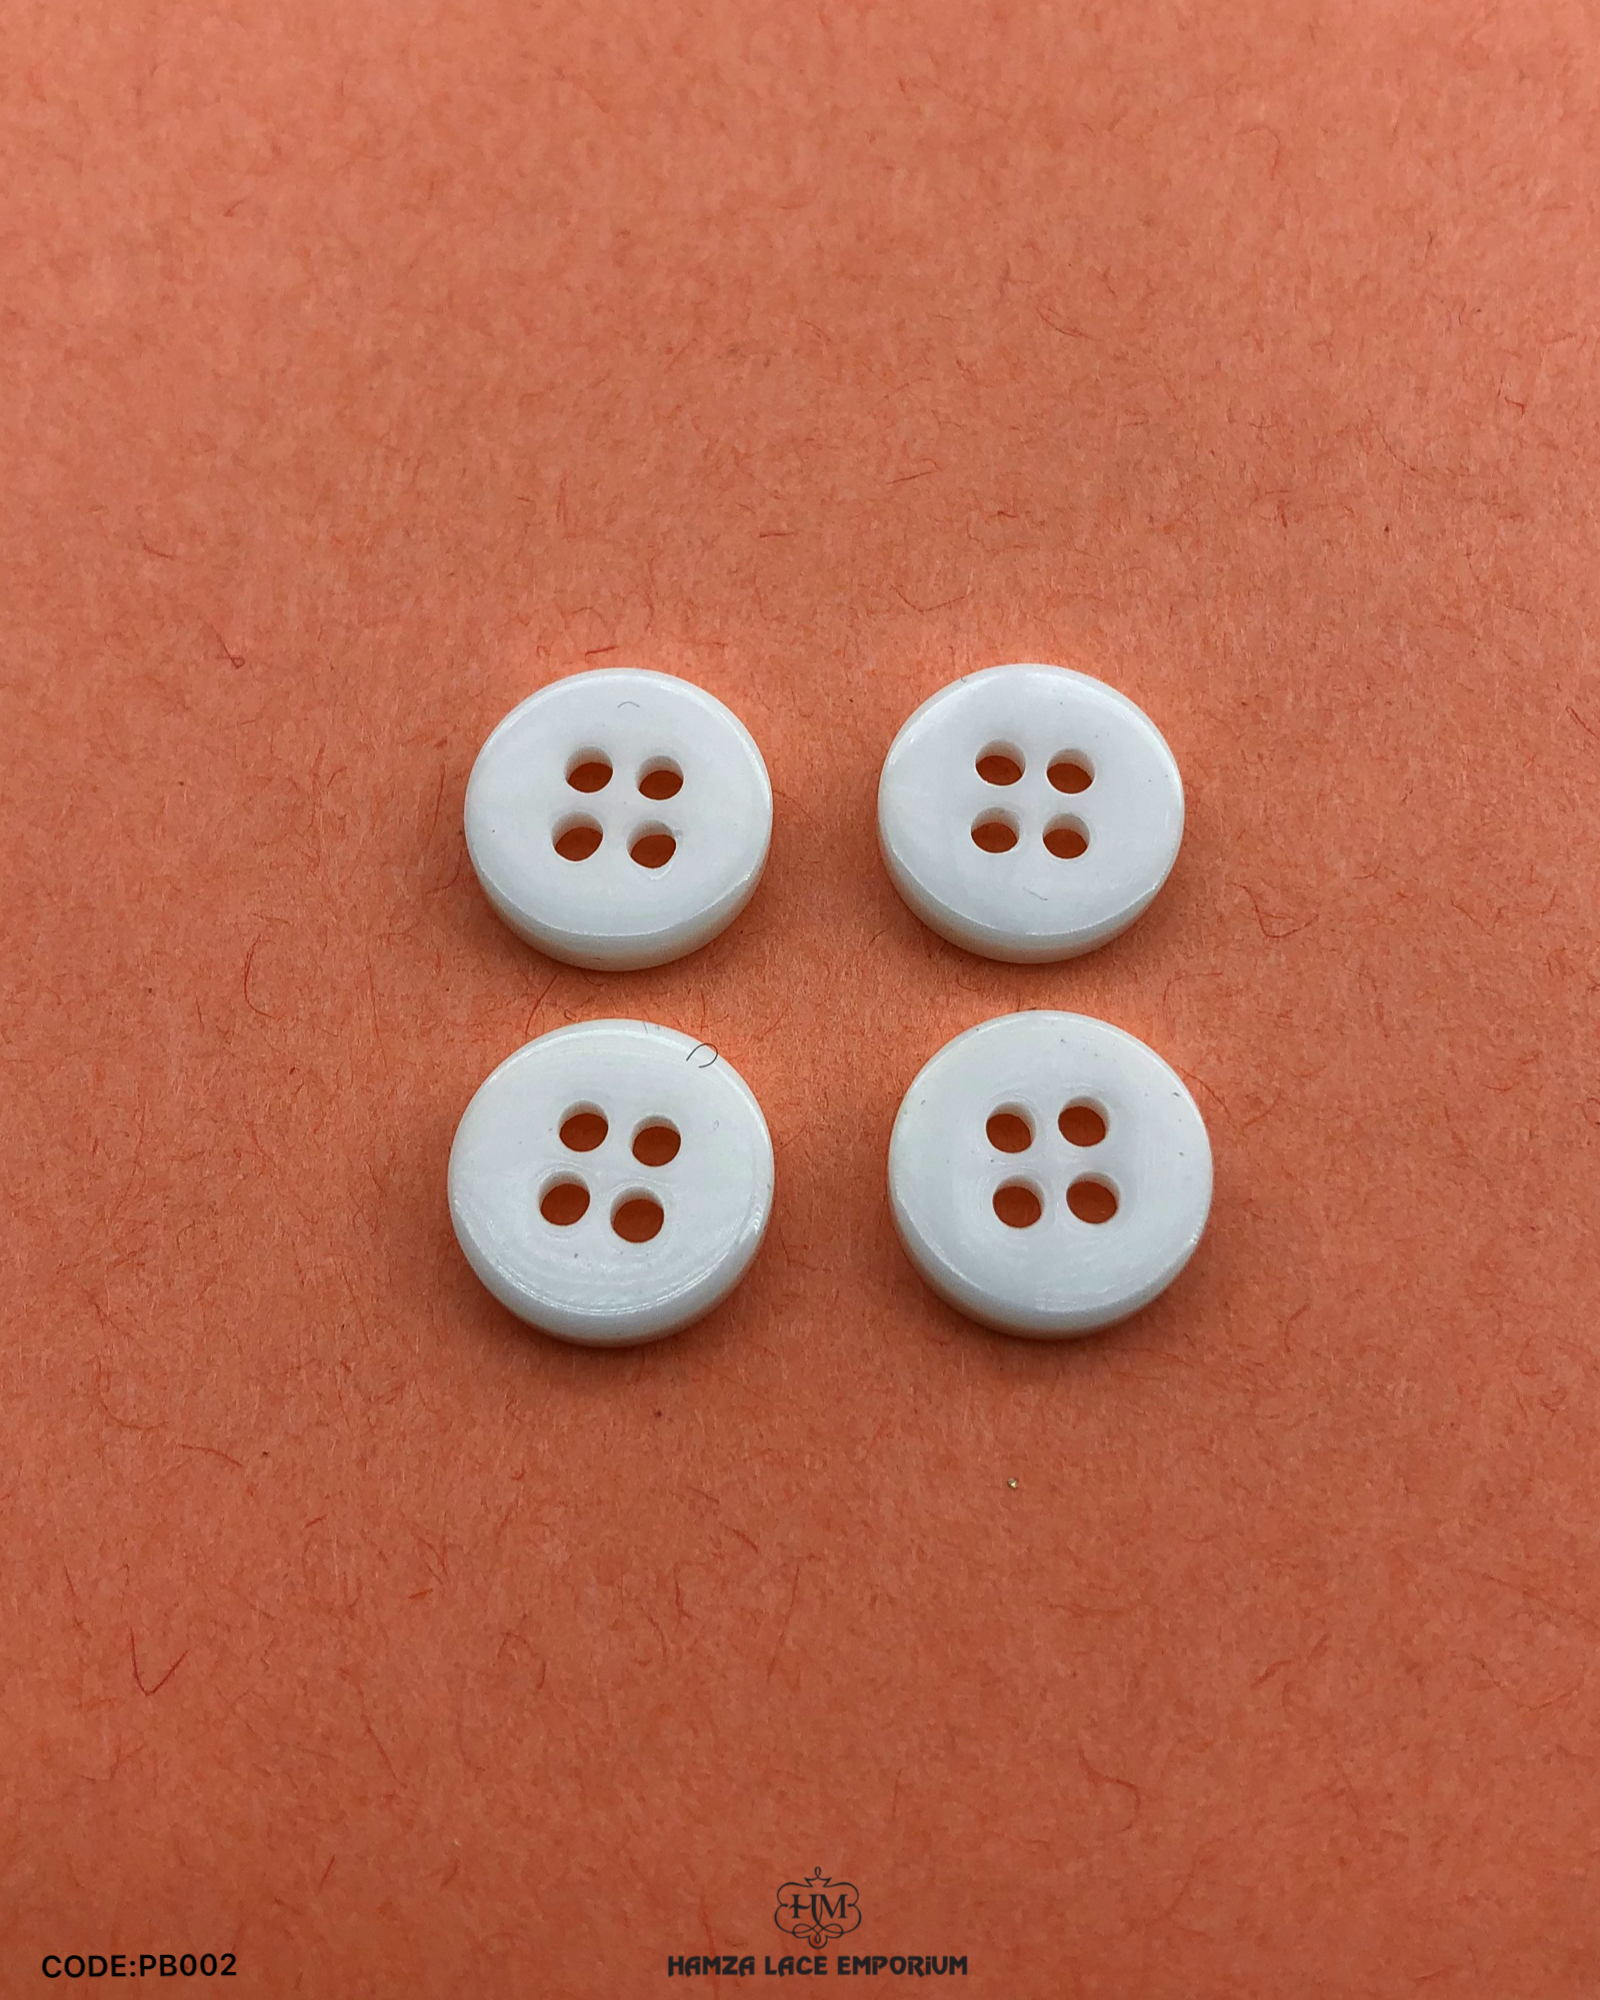 'Four Hole Plastic Button PB002' - suitable for fashion and decorative purposes